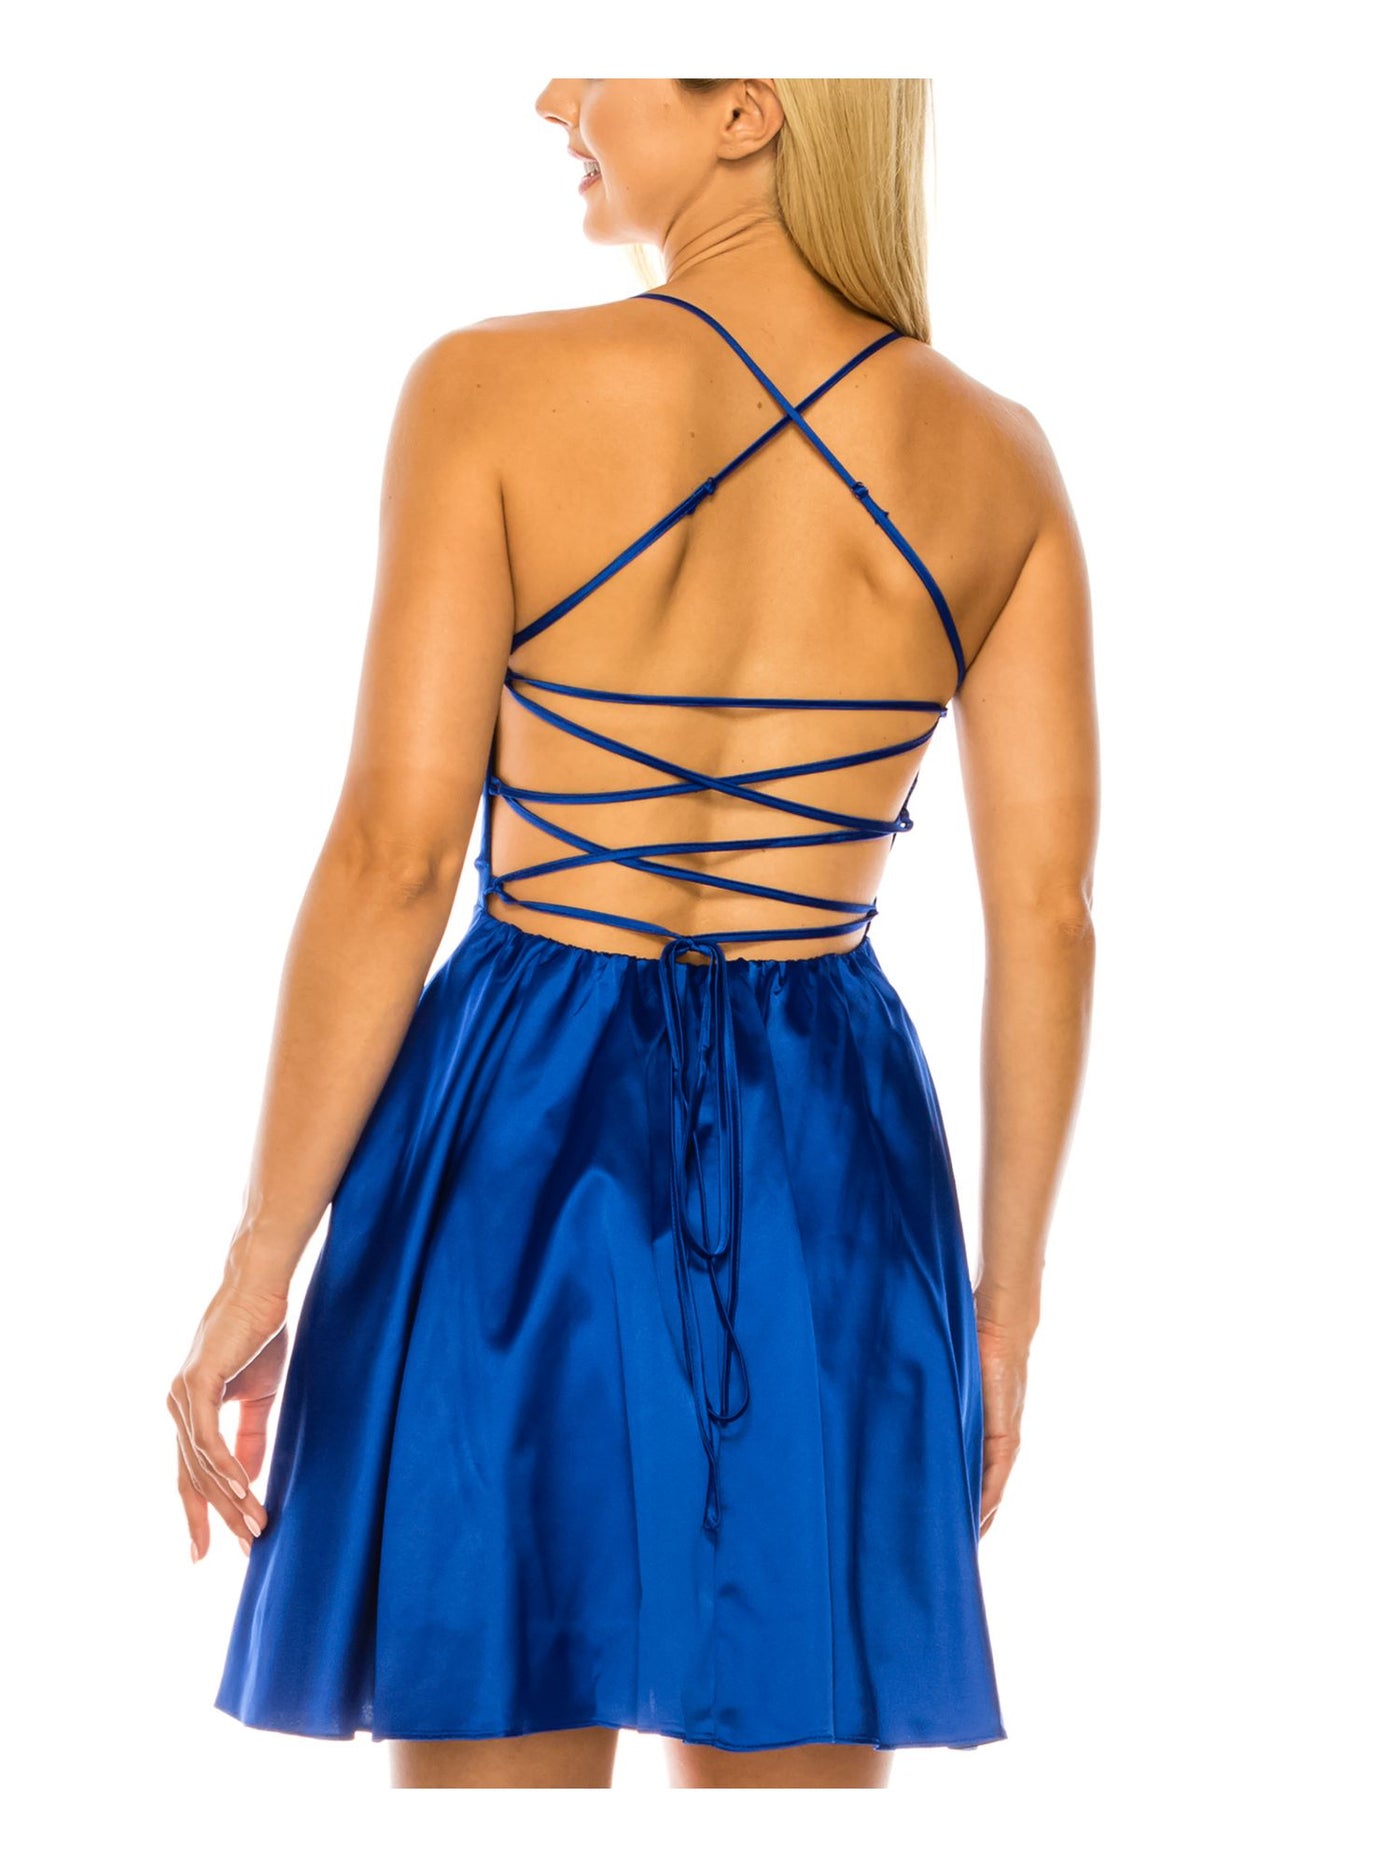 B DARLIN Womens Blue Open Back Adjustable Lined Pocketed Spaghetti Strap Square Neck Short Party A-Line Dress Juniors 5\6